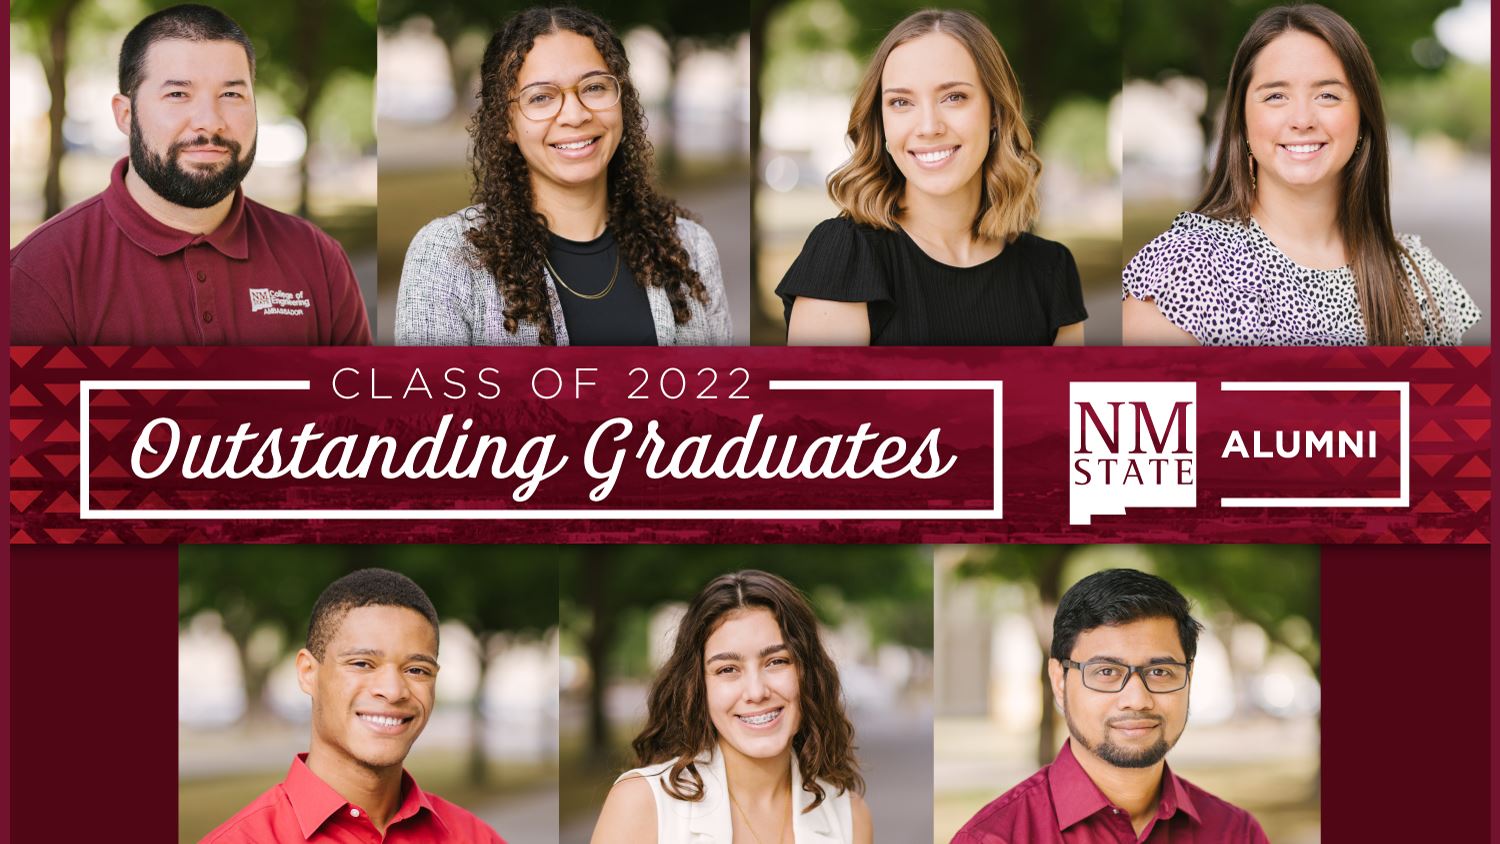 Seven NMSU students honored with prestigious Outstanding Graduate Award